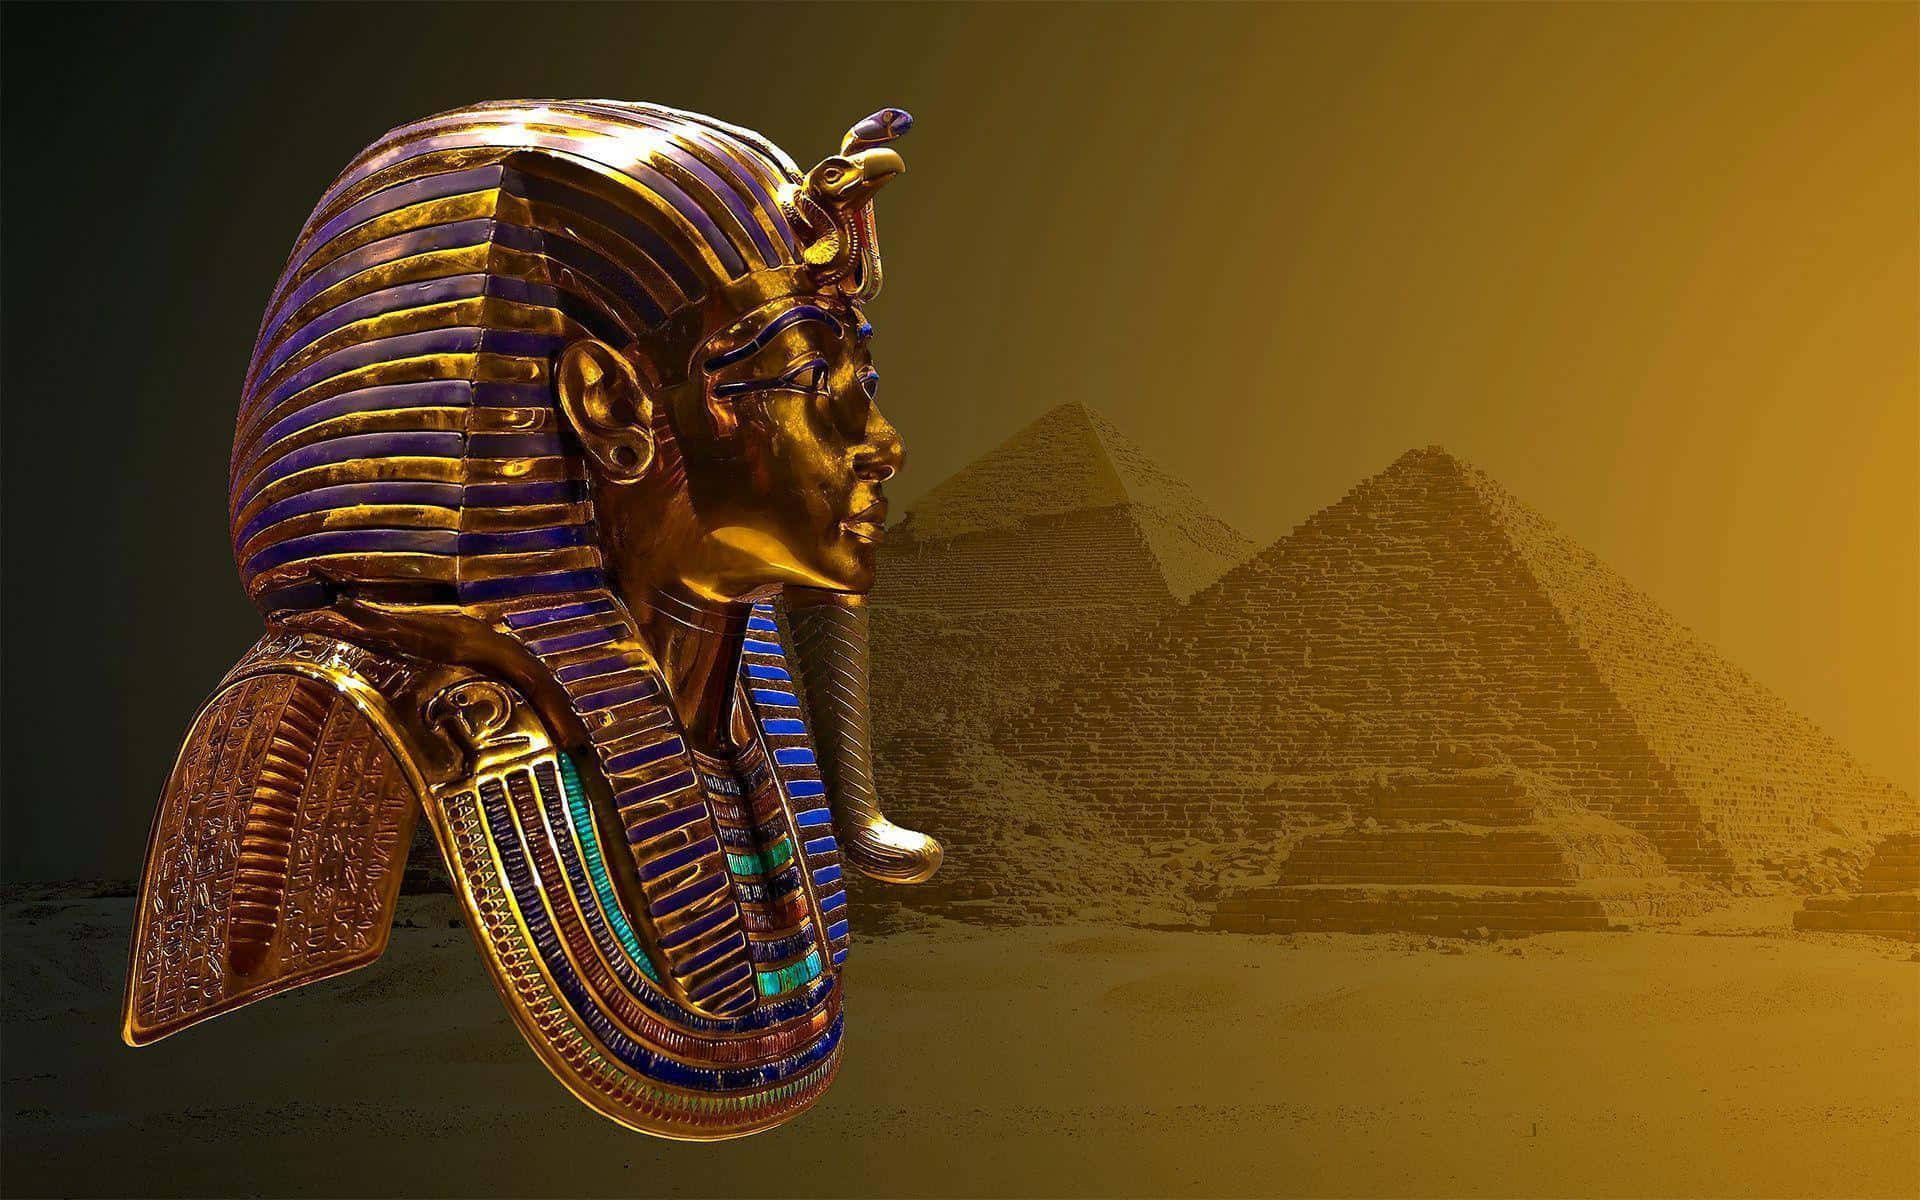 A Golden Egyptian Mask Is Shown In Front Of The Pyramids